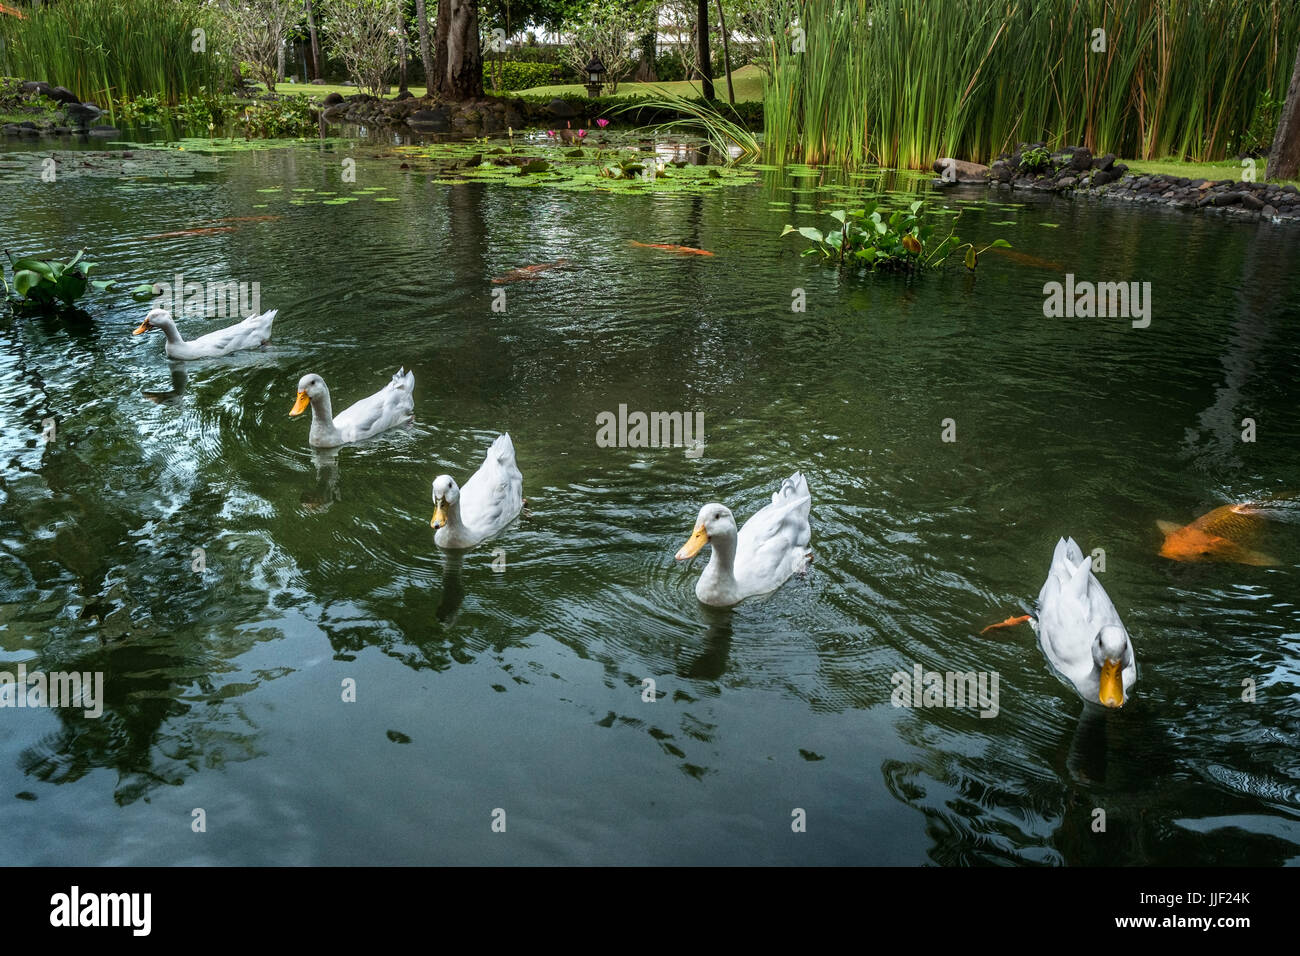 Ducks in a pond, Bali, Indonesia Stock Photo